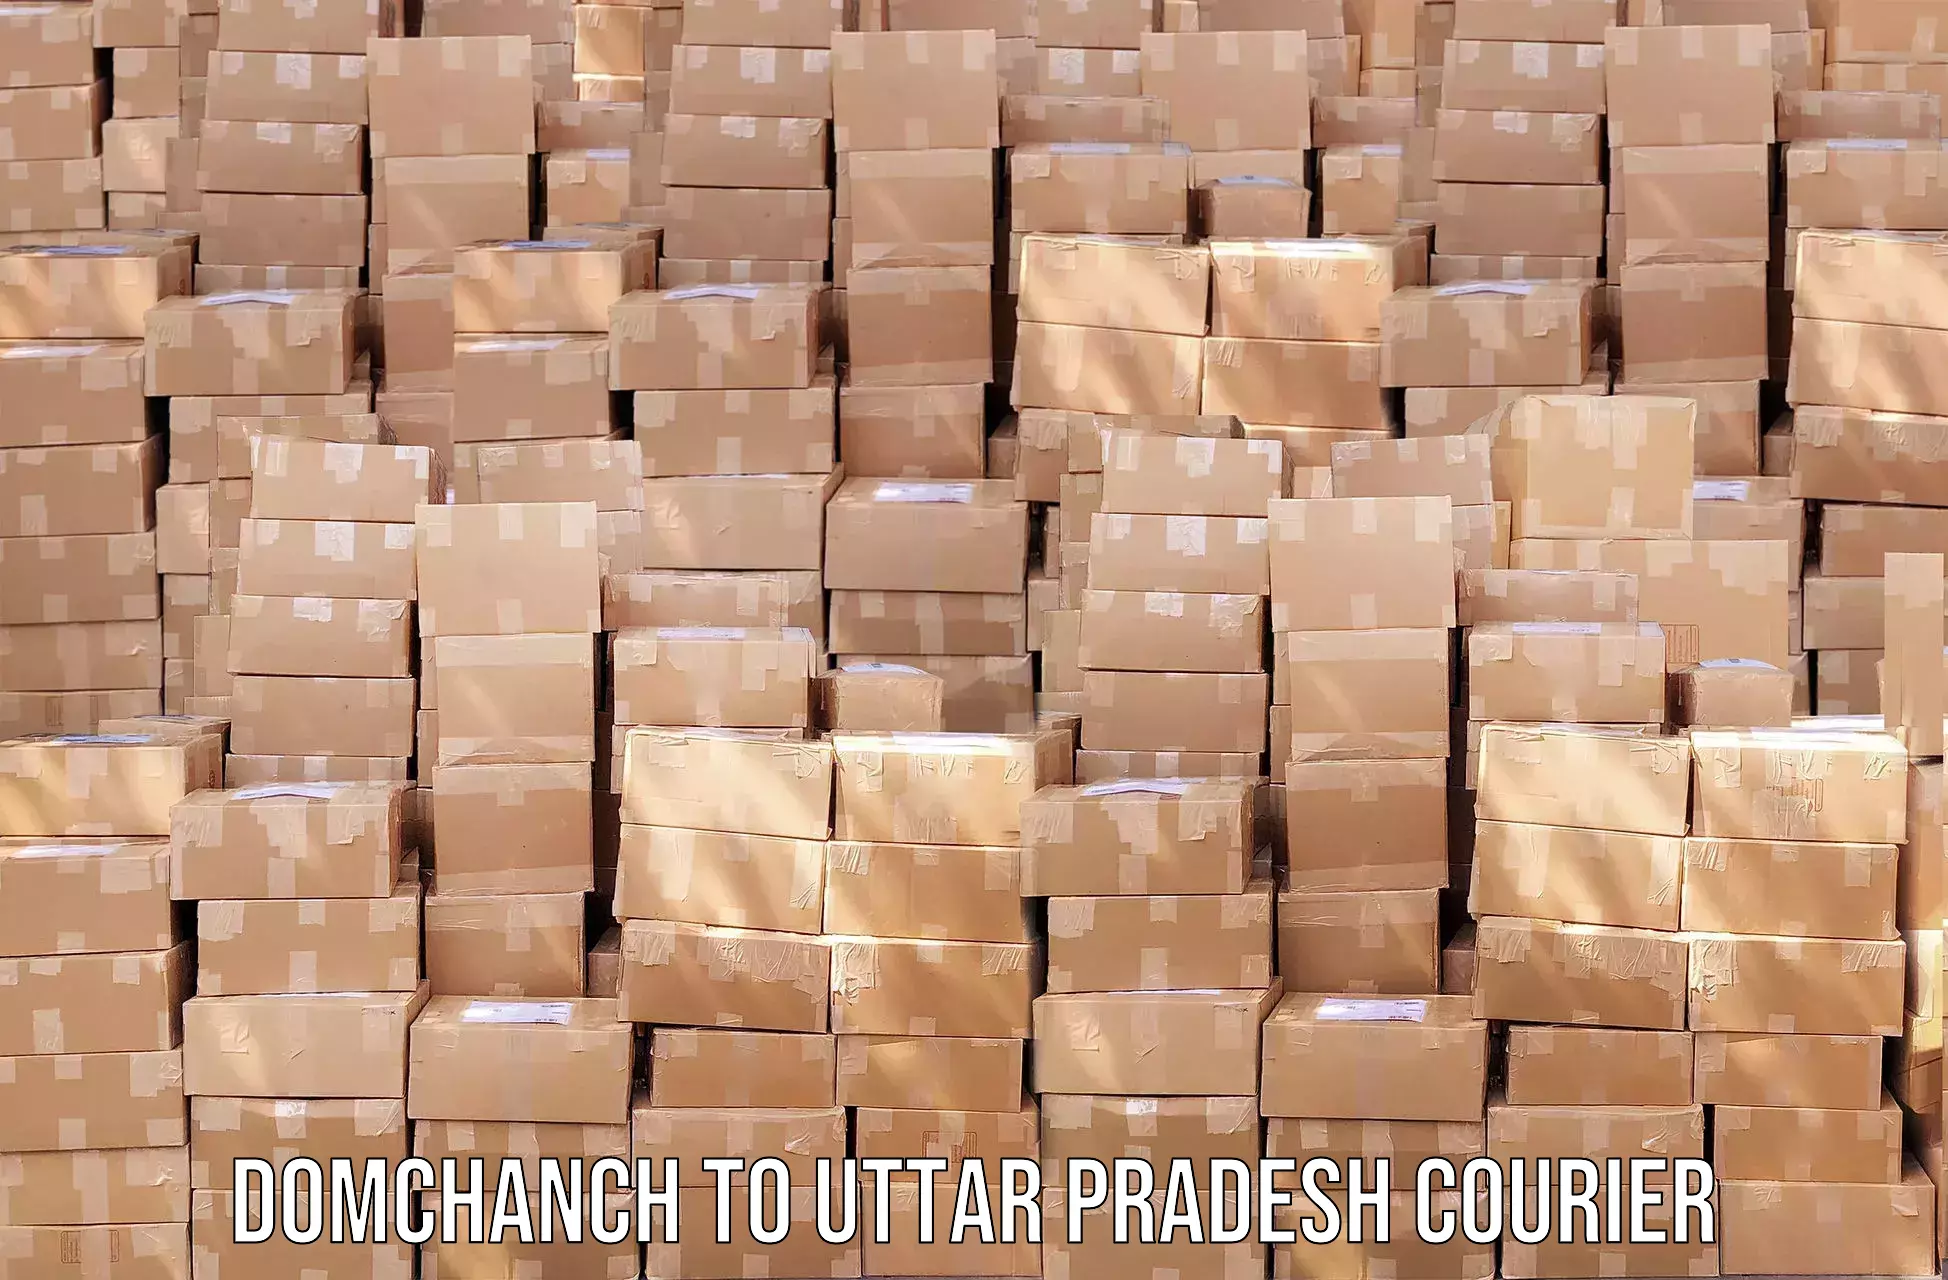 Enhanced tracking features Domchanch to Farrukhabad